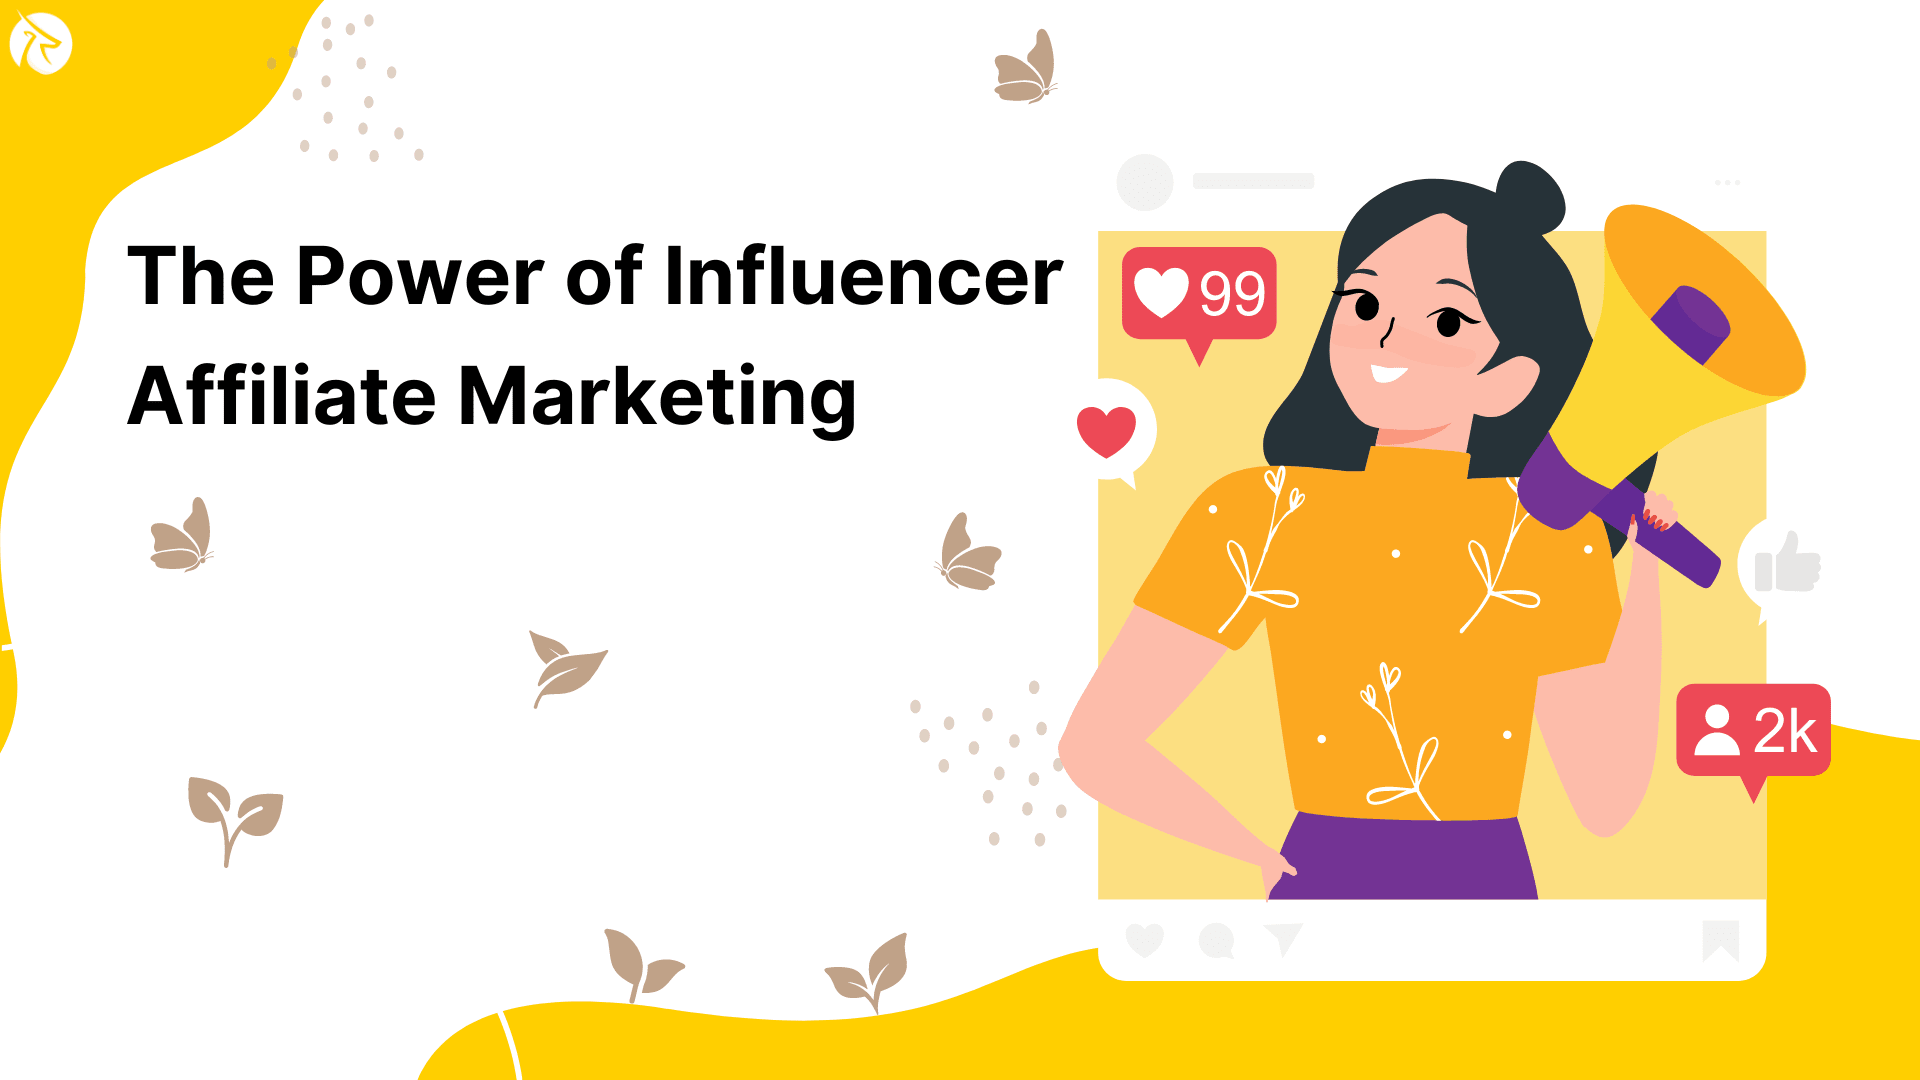 The Power of Influencer Affiliate Marketing